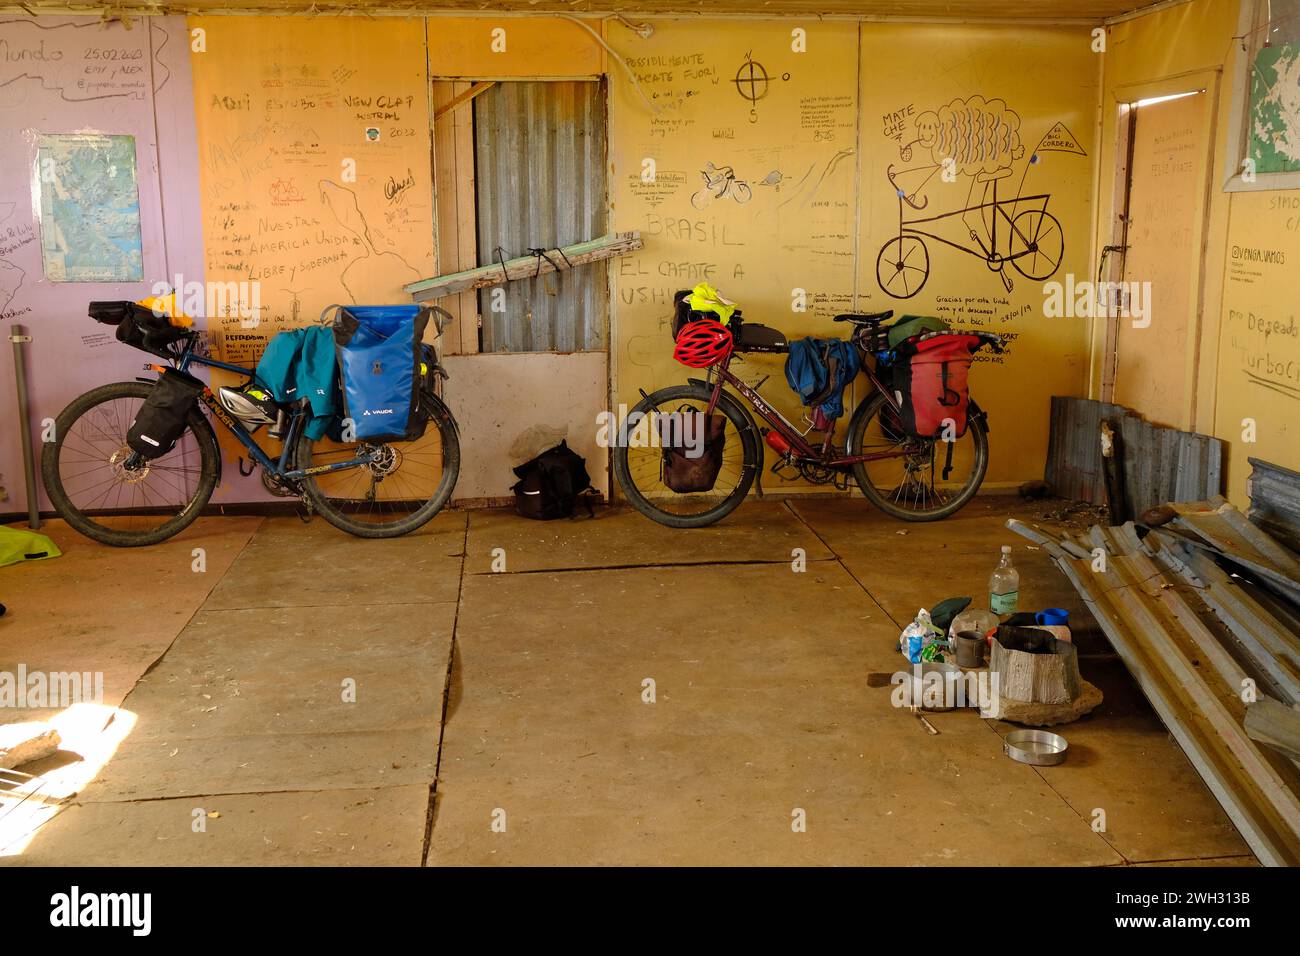 While riding in Patagonia, many cyclists seek overnight refuge from the wind in abandoned buildings. These acquire records of journeys on the walls. Stock Photo